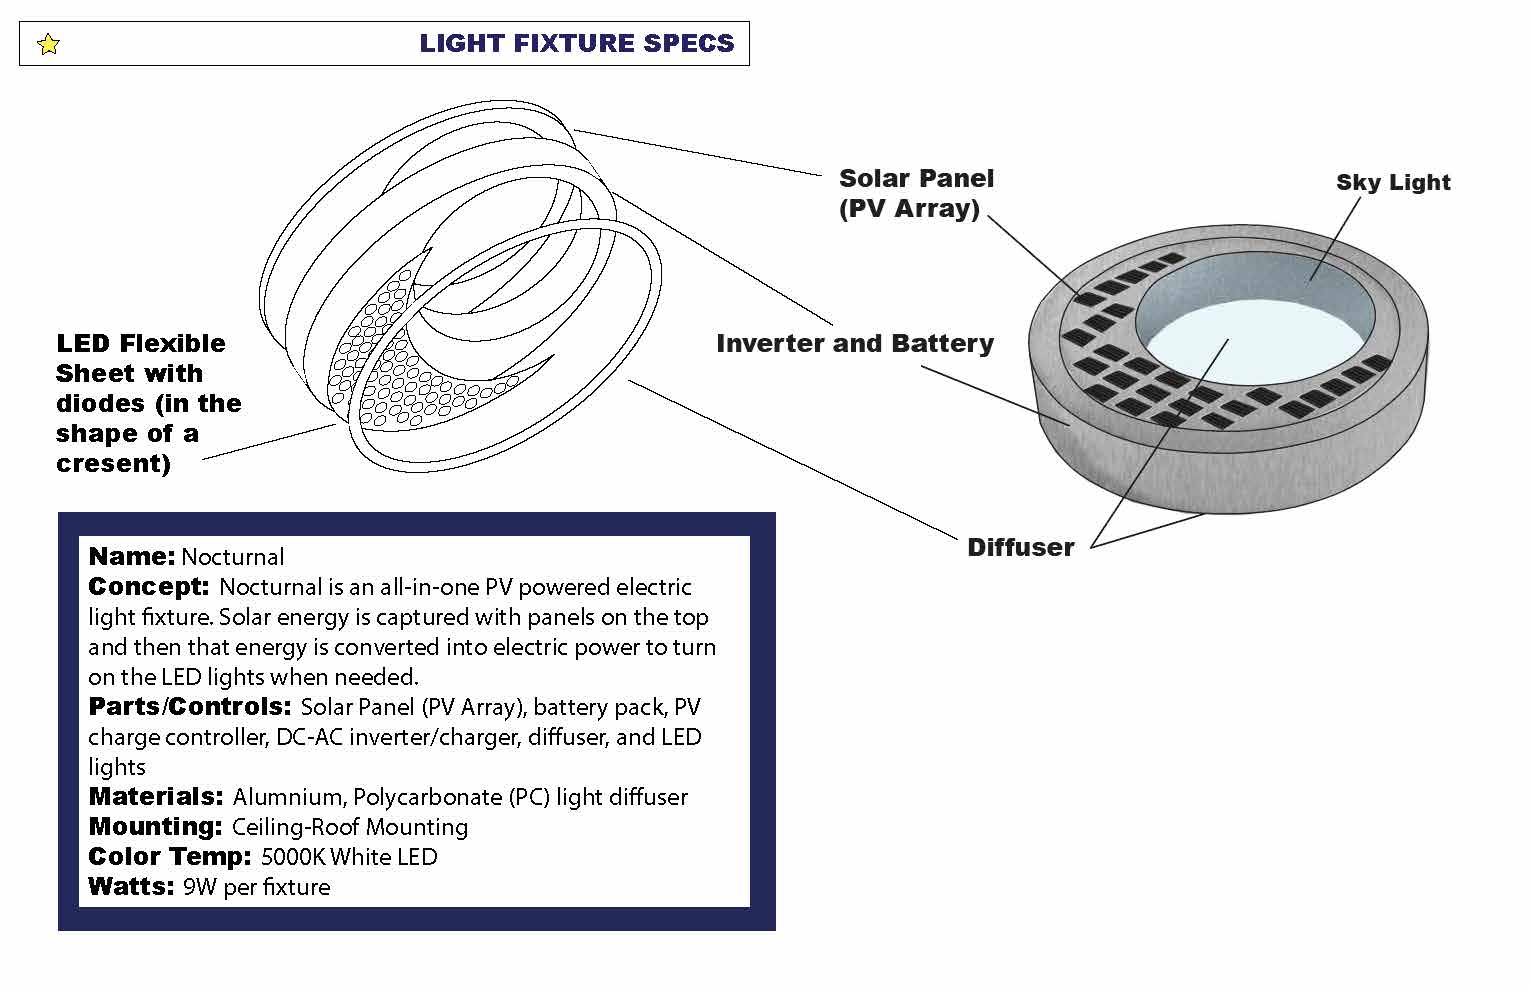 Specifications for Alli Brook's light fixture.